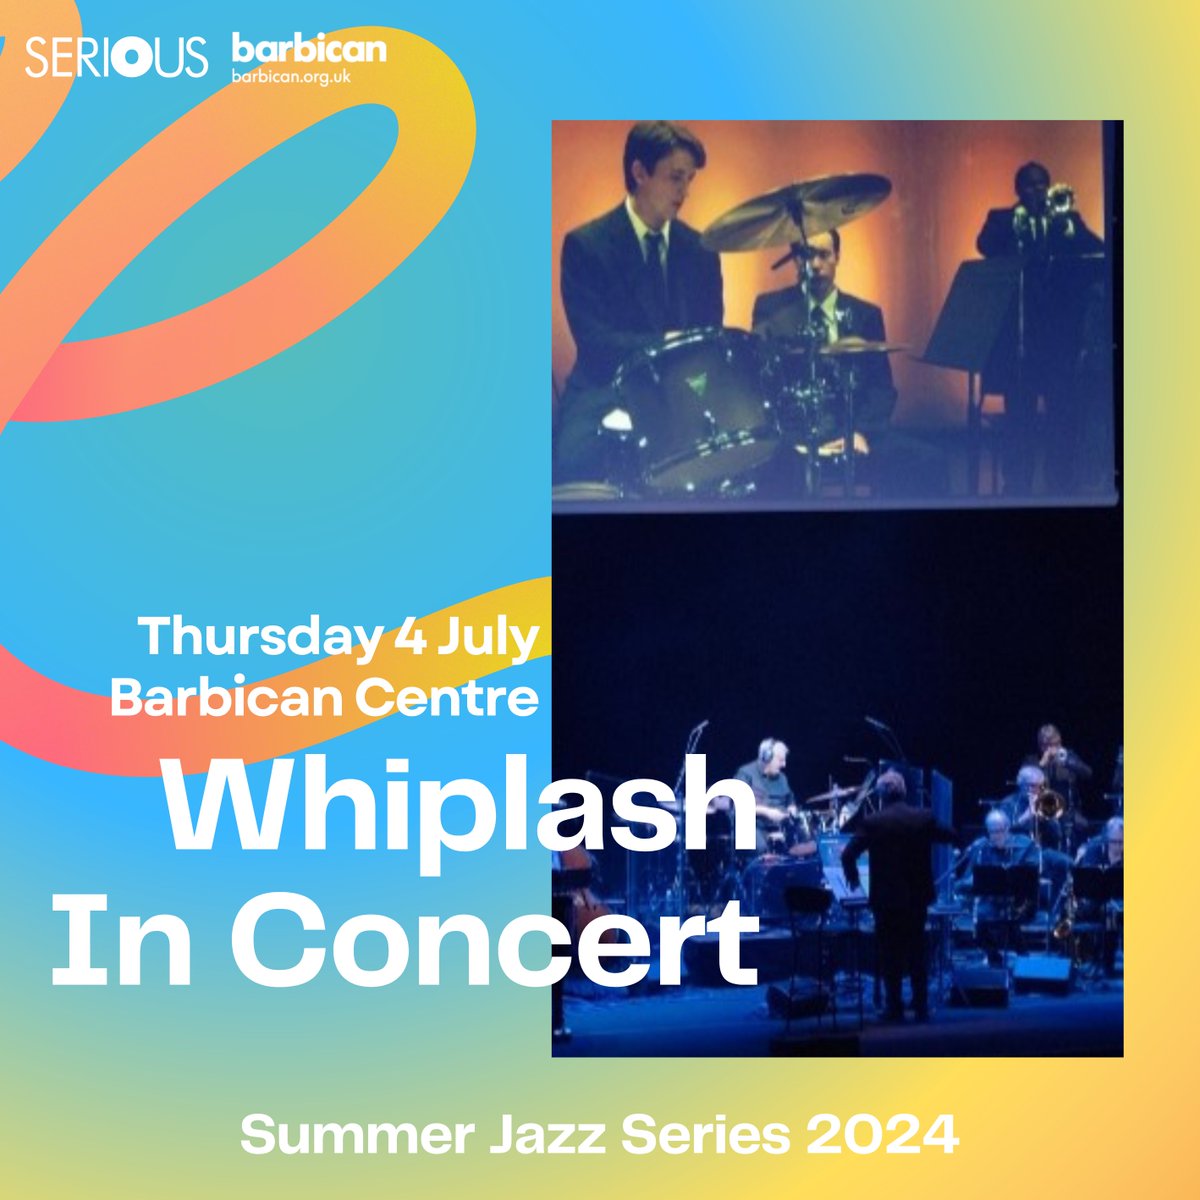 Our Summer Jazz Series returns to London this June and July🌞 29 June @_MayraAndrade_ 4 July Whiplash in Concert 11 July @gretchenparlato & @lionelloueke * 12 July @scarypockets * 21 July @mpeyrouxmusic *on sale Fri 12 April 🎟️ Tickets at serious.org.uk/summerjazzseri…